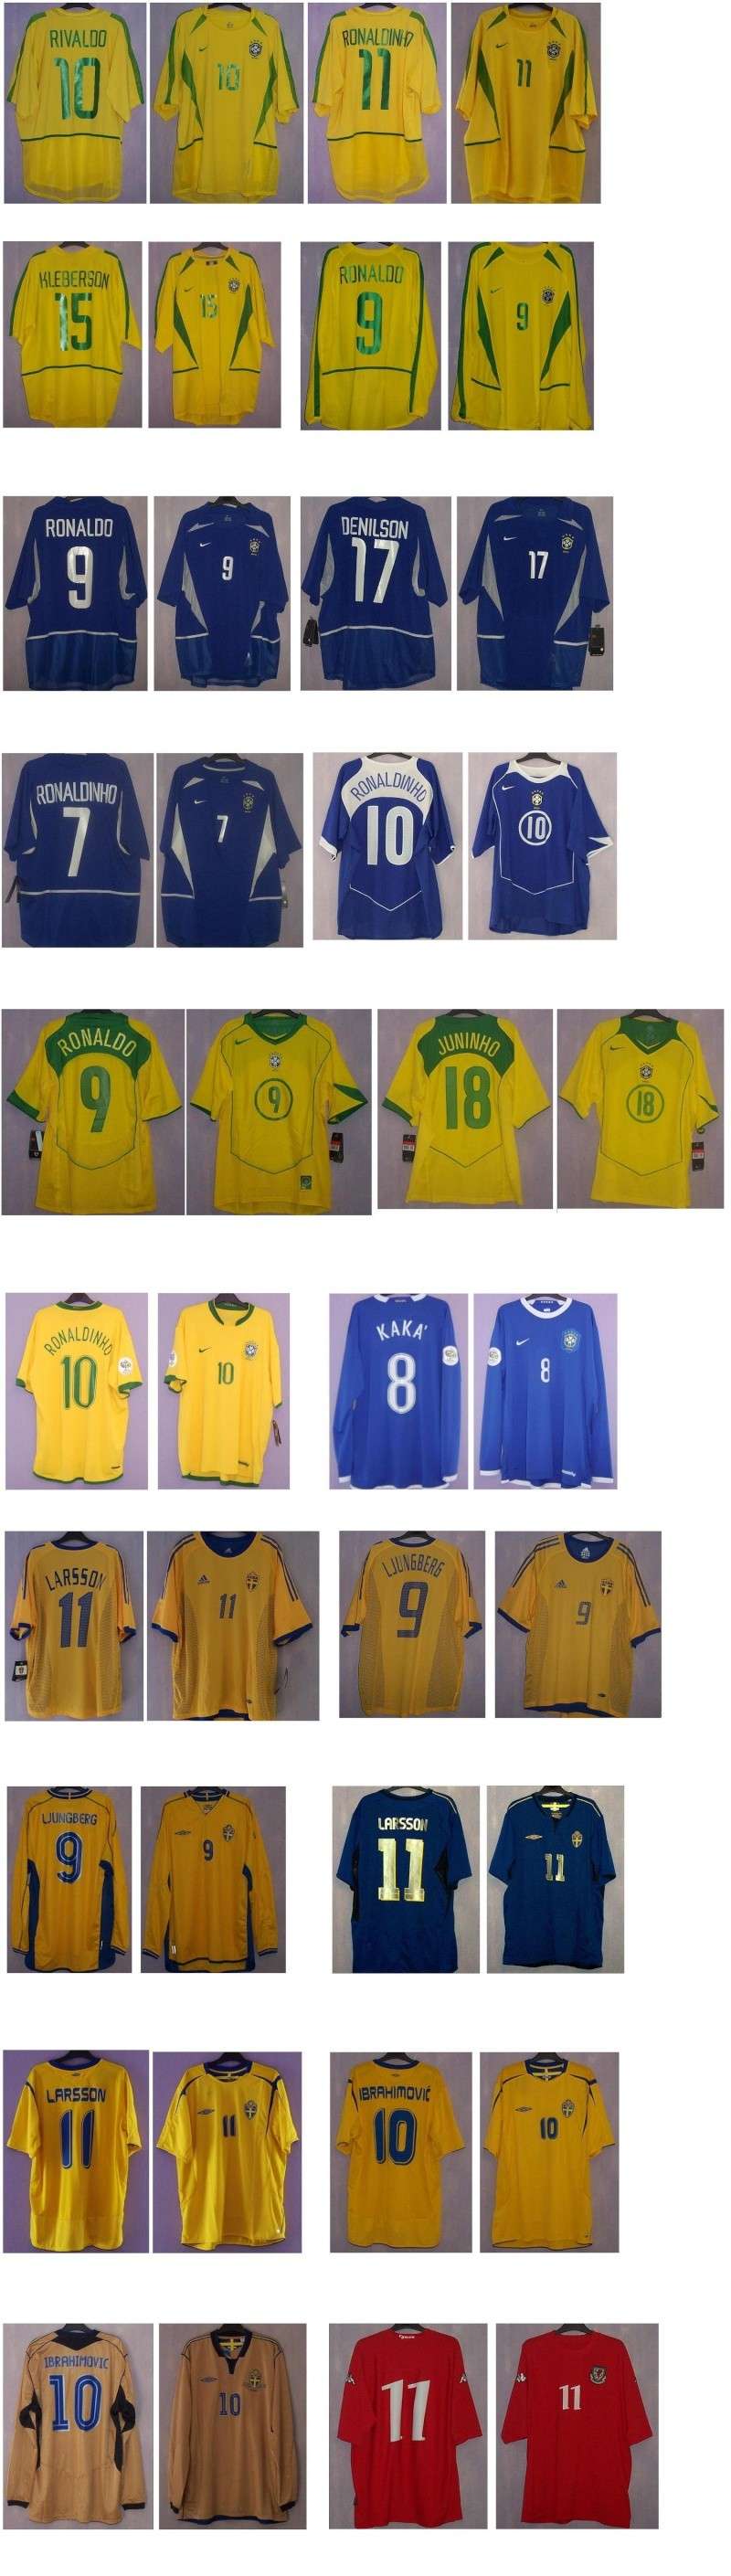 treble 1999 shirt collection - Page 3 Brassw10